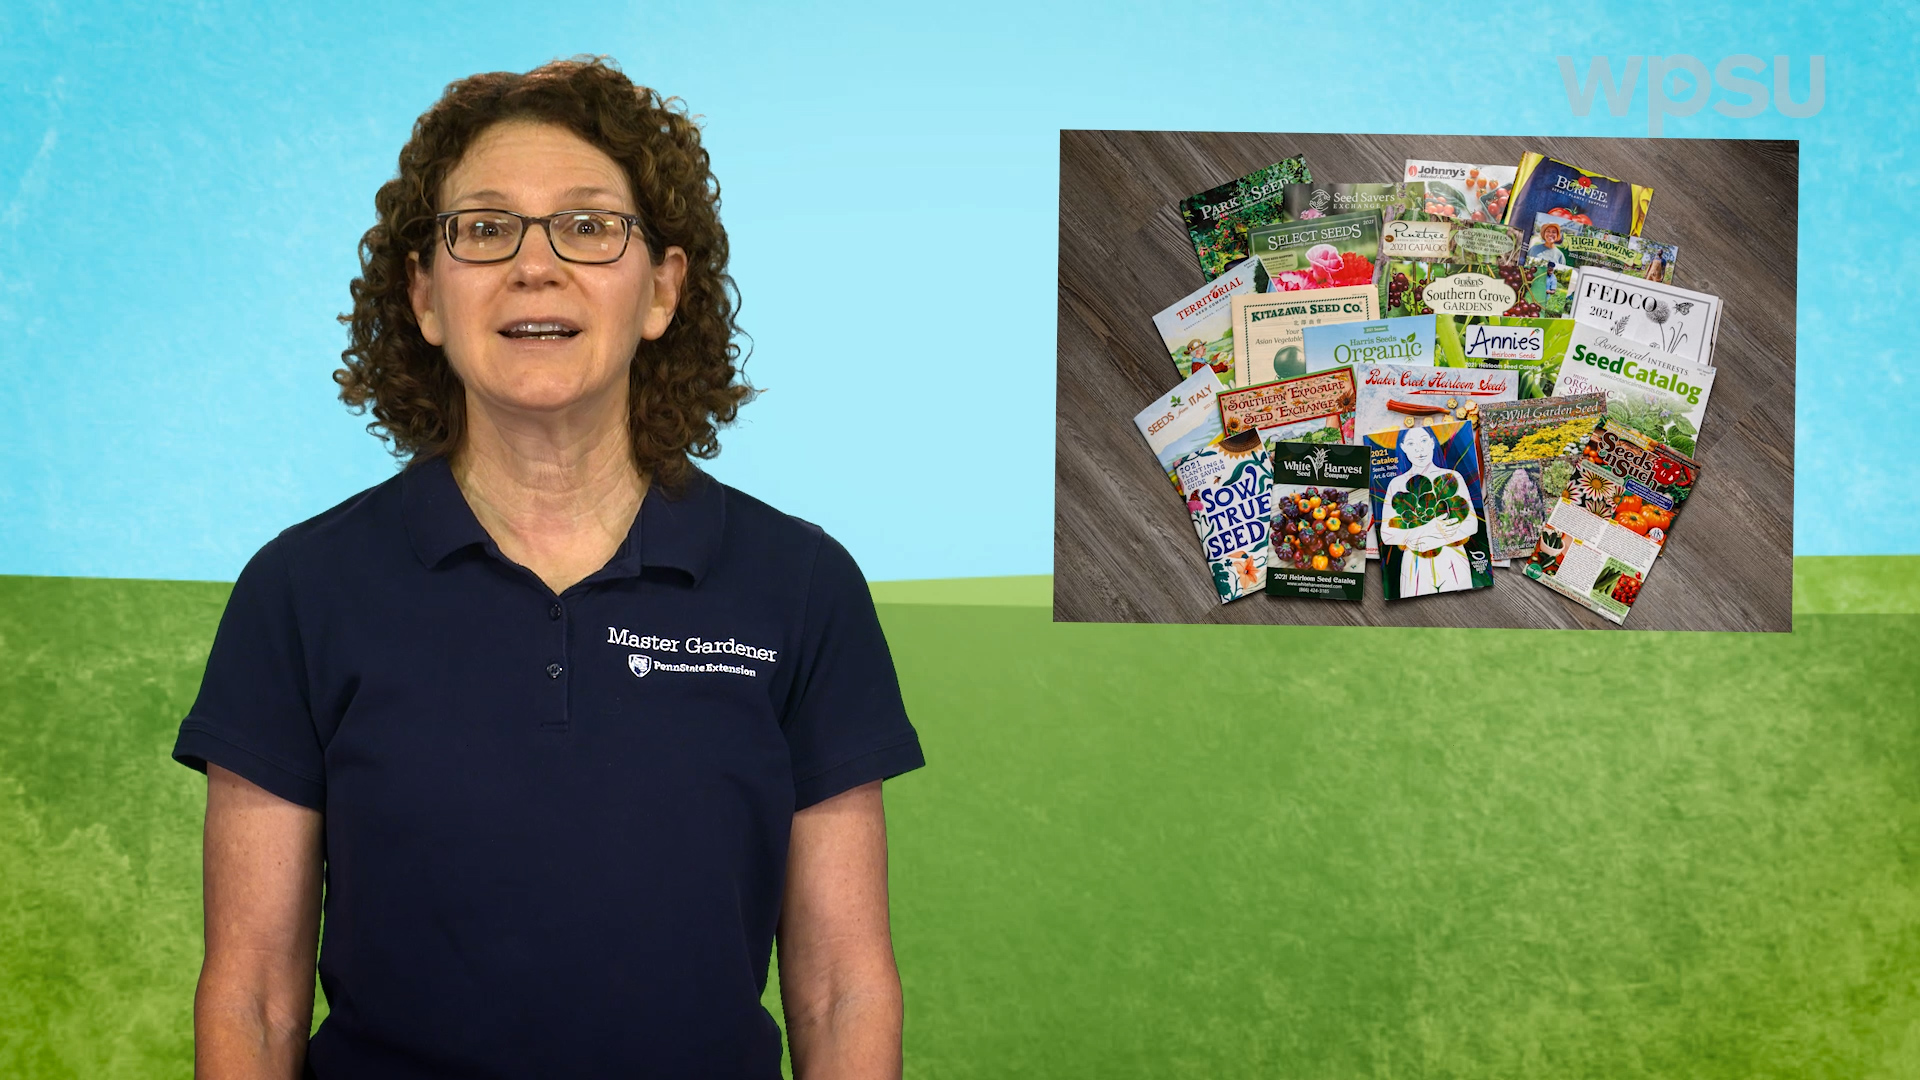 Lisa Schneider from Penn State extension standing before a green and blue background with a hovering photograph of seed catalogs for gardening.